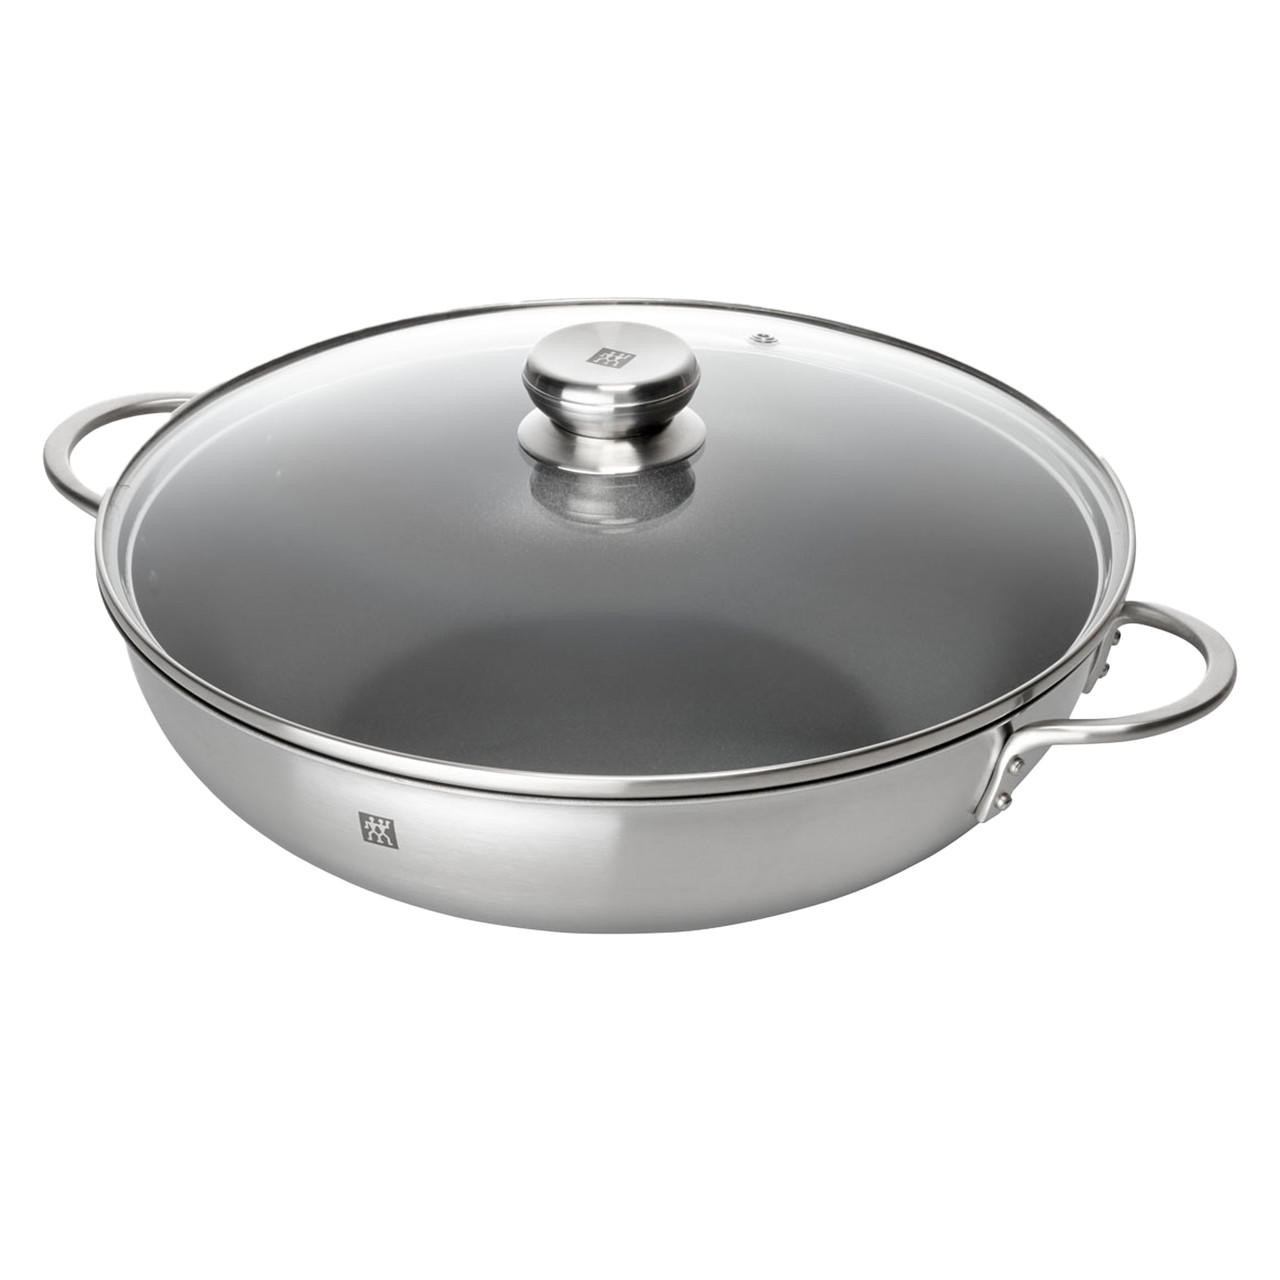 Zwilling 32 cm Wok with Lid – Non-Stick Coating, Stainless-Steel